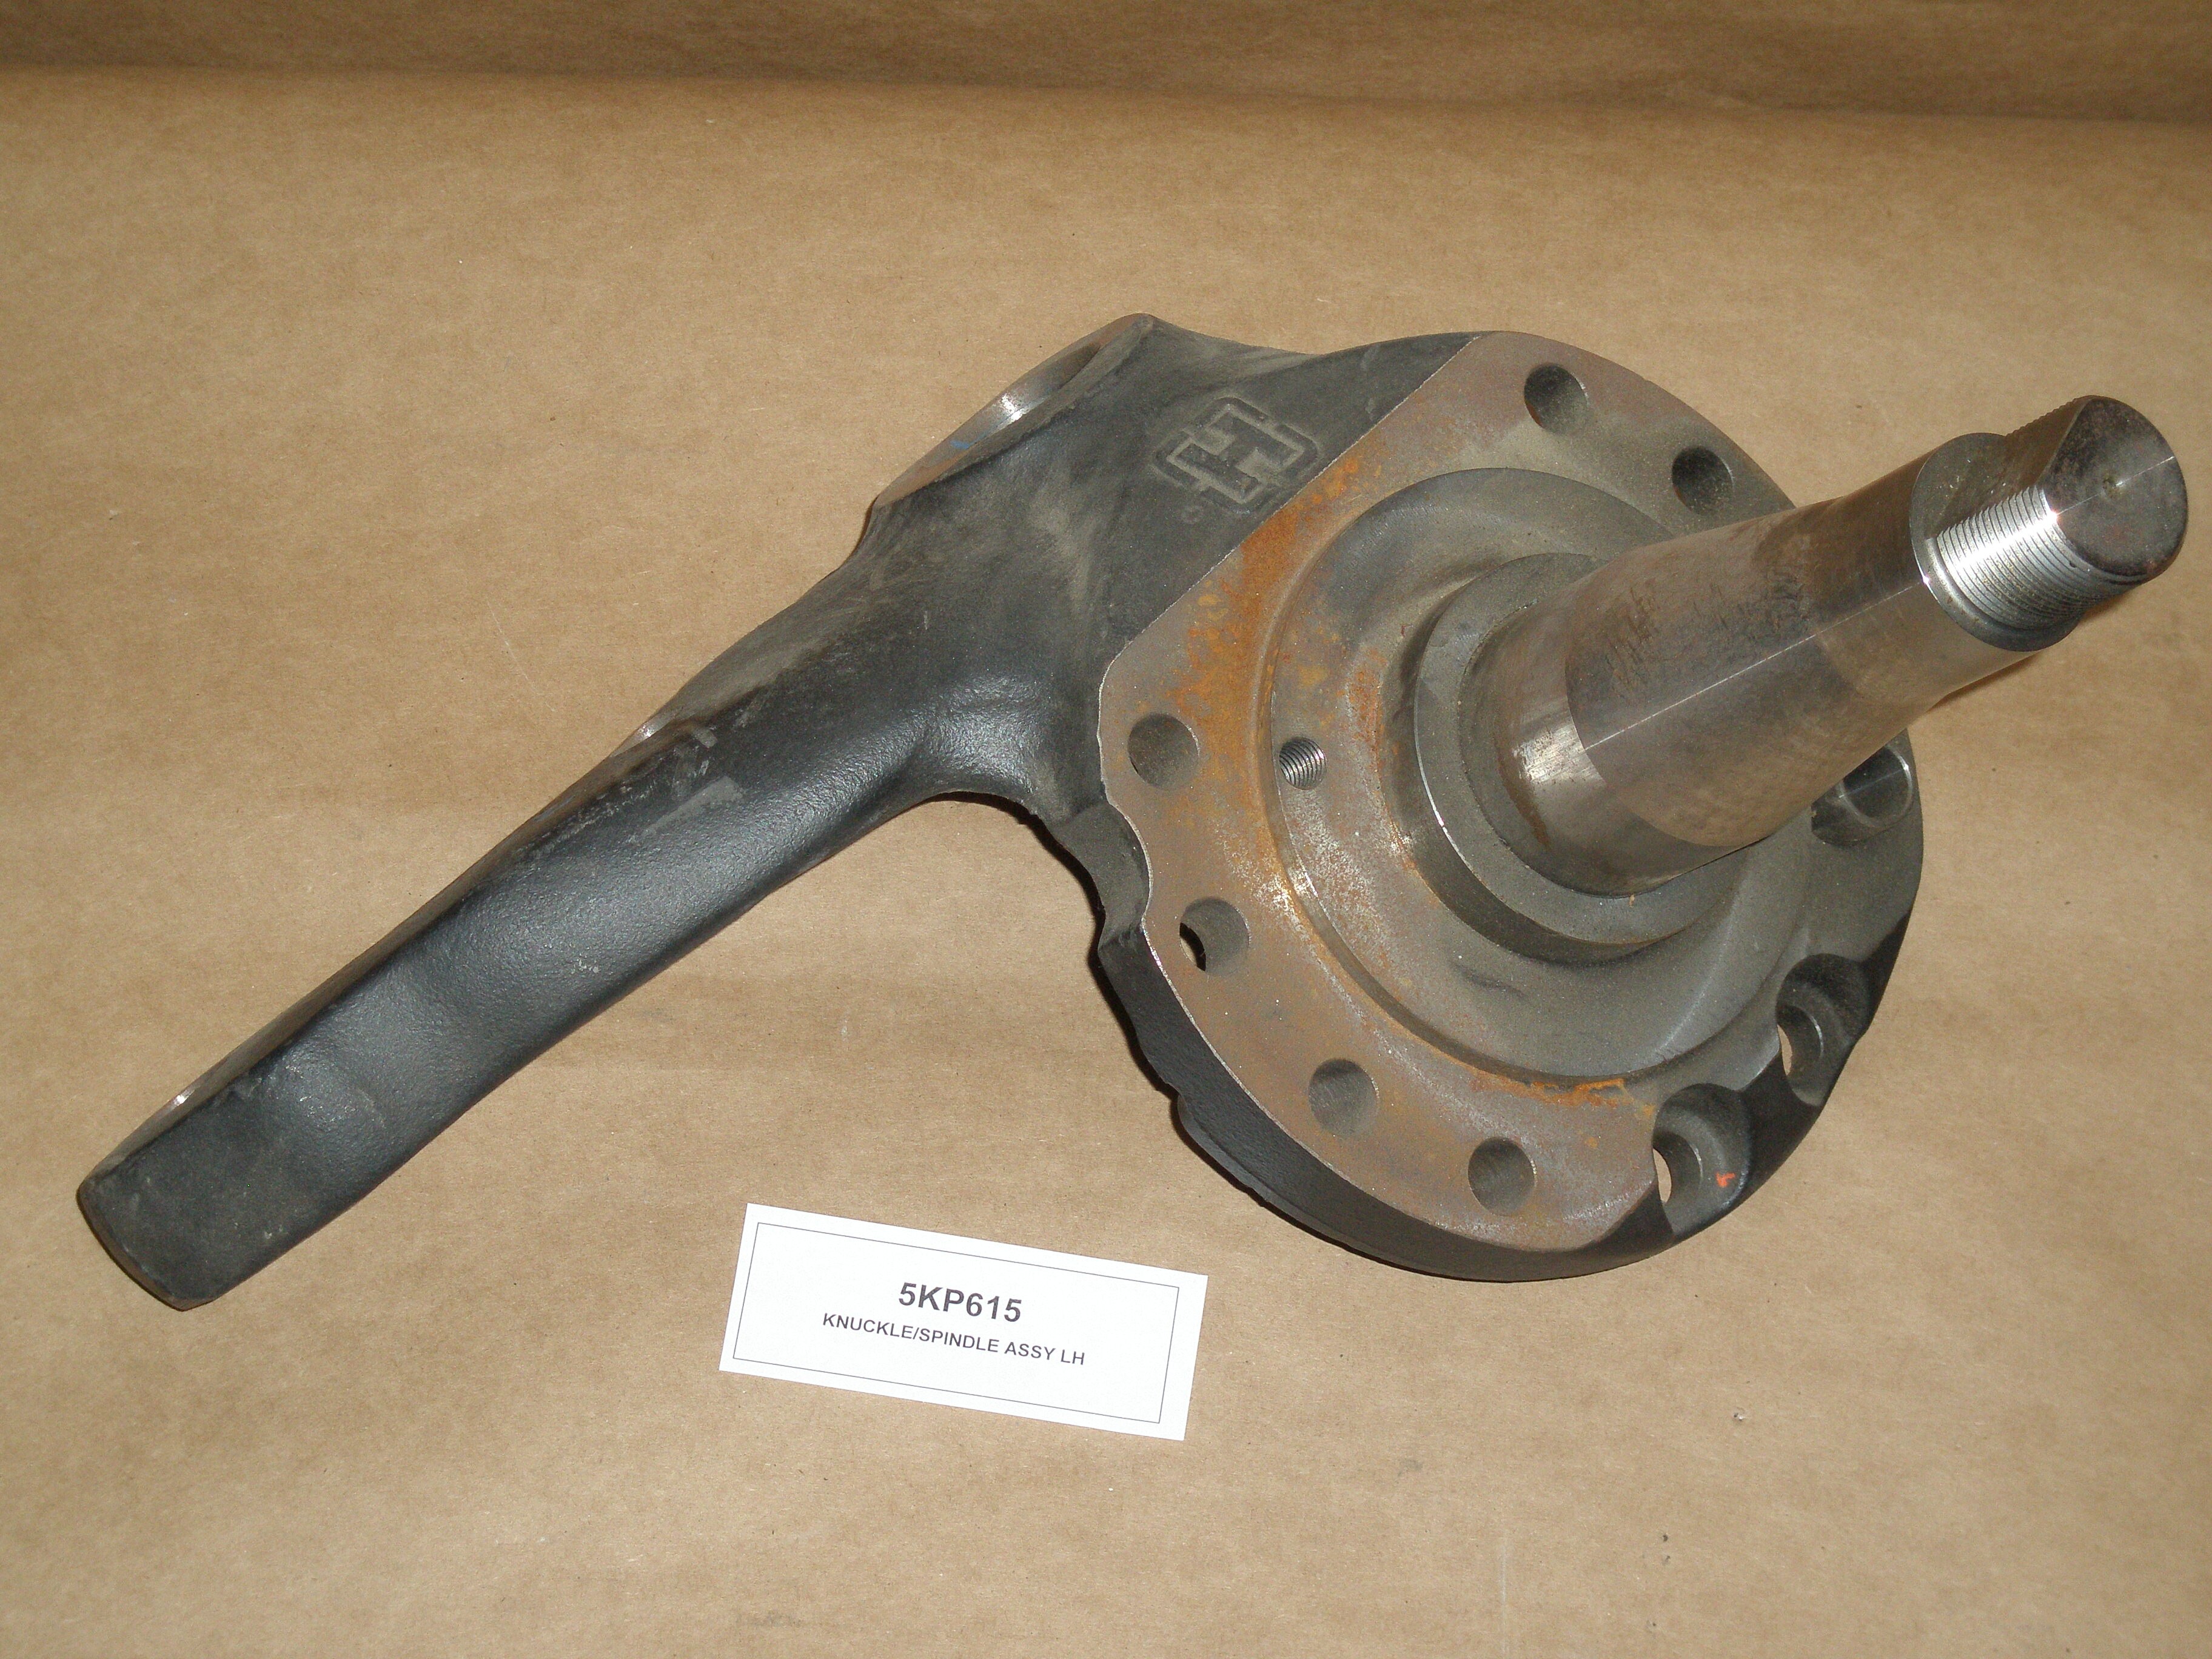 KNUCKLE/SPINDLE ASSY LH